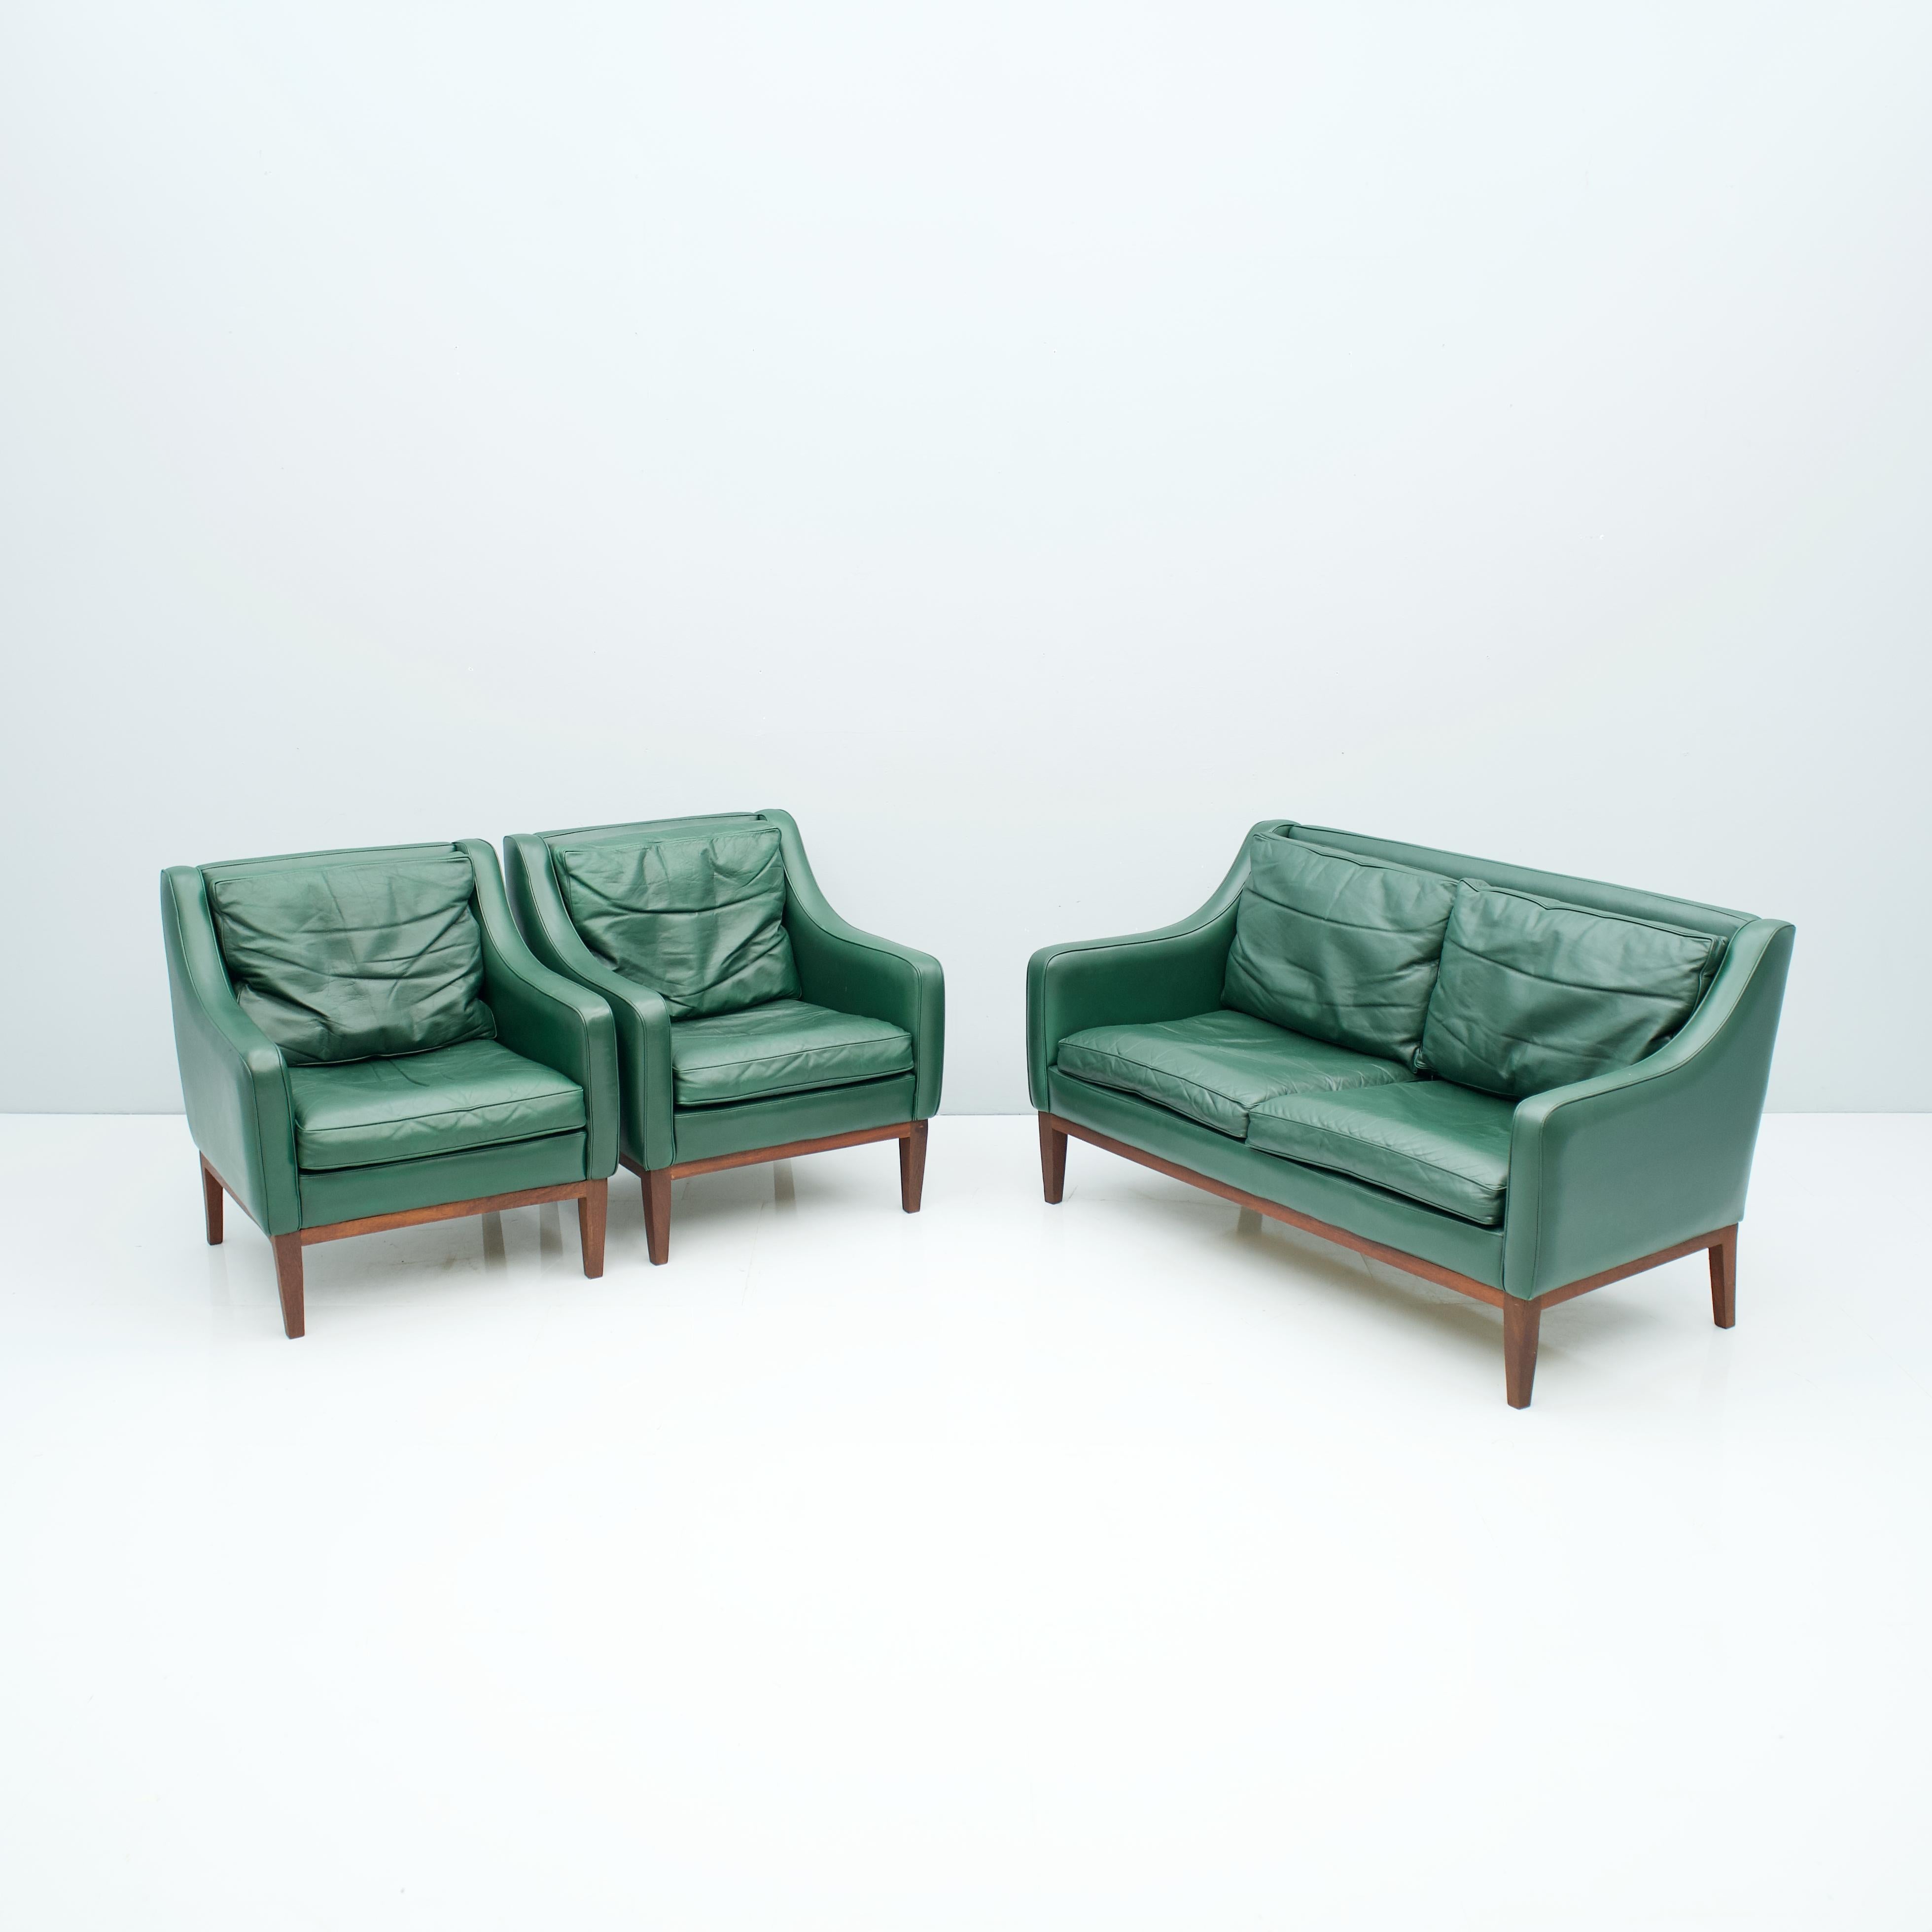 Mid-Century Modern Living Room Set in Green Leather Sofa and Lounge Chairs Italy 1958 Teak For Sale